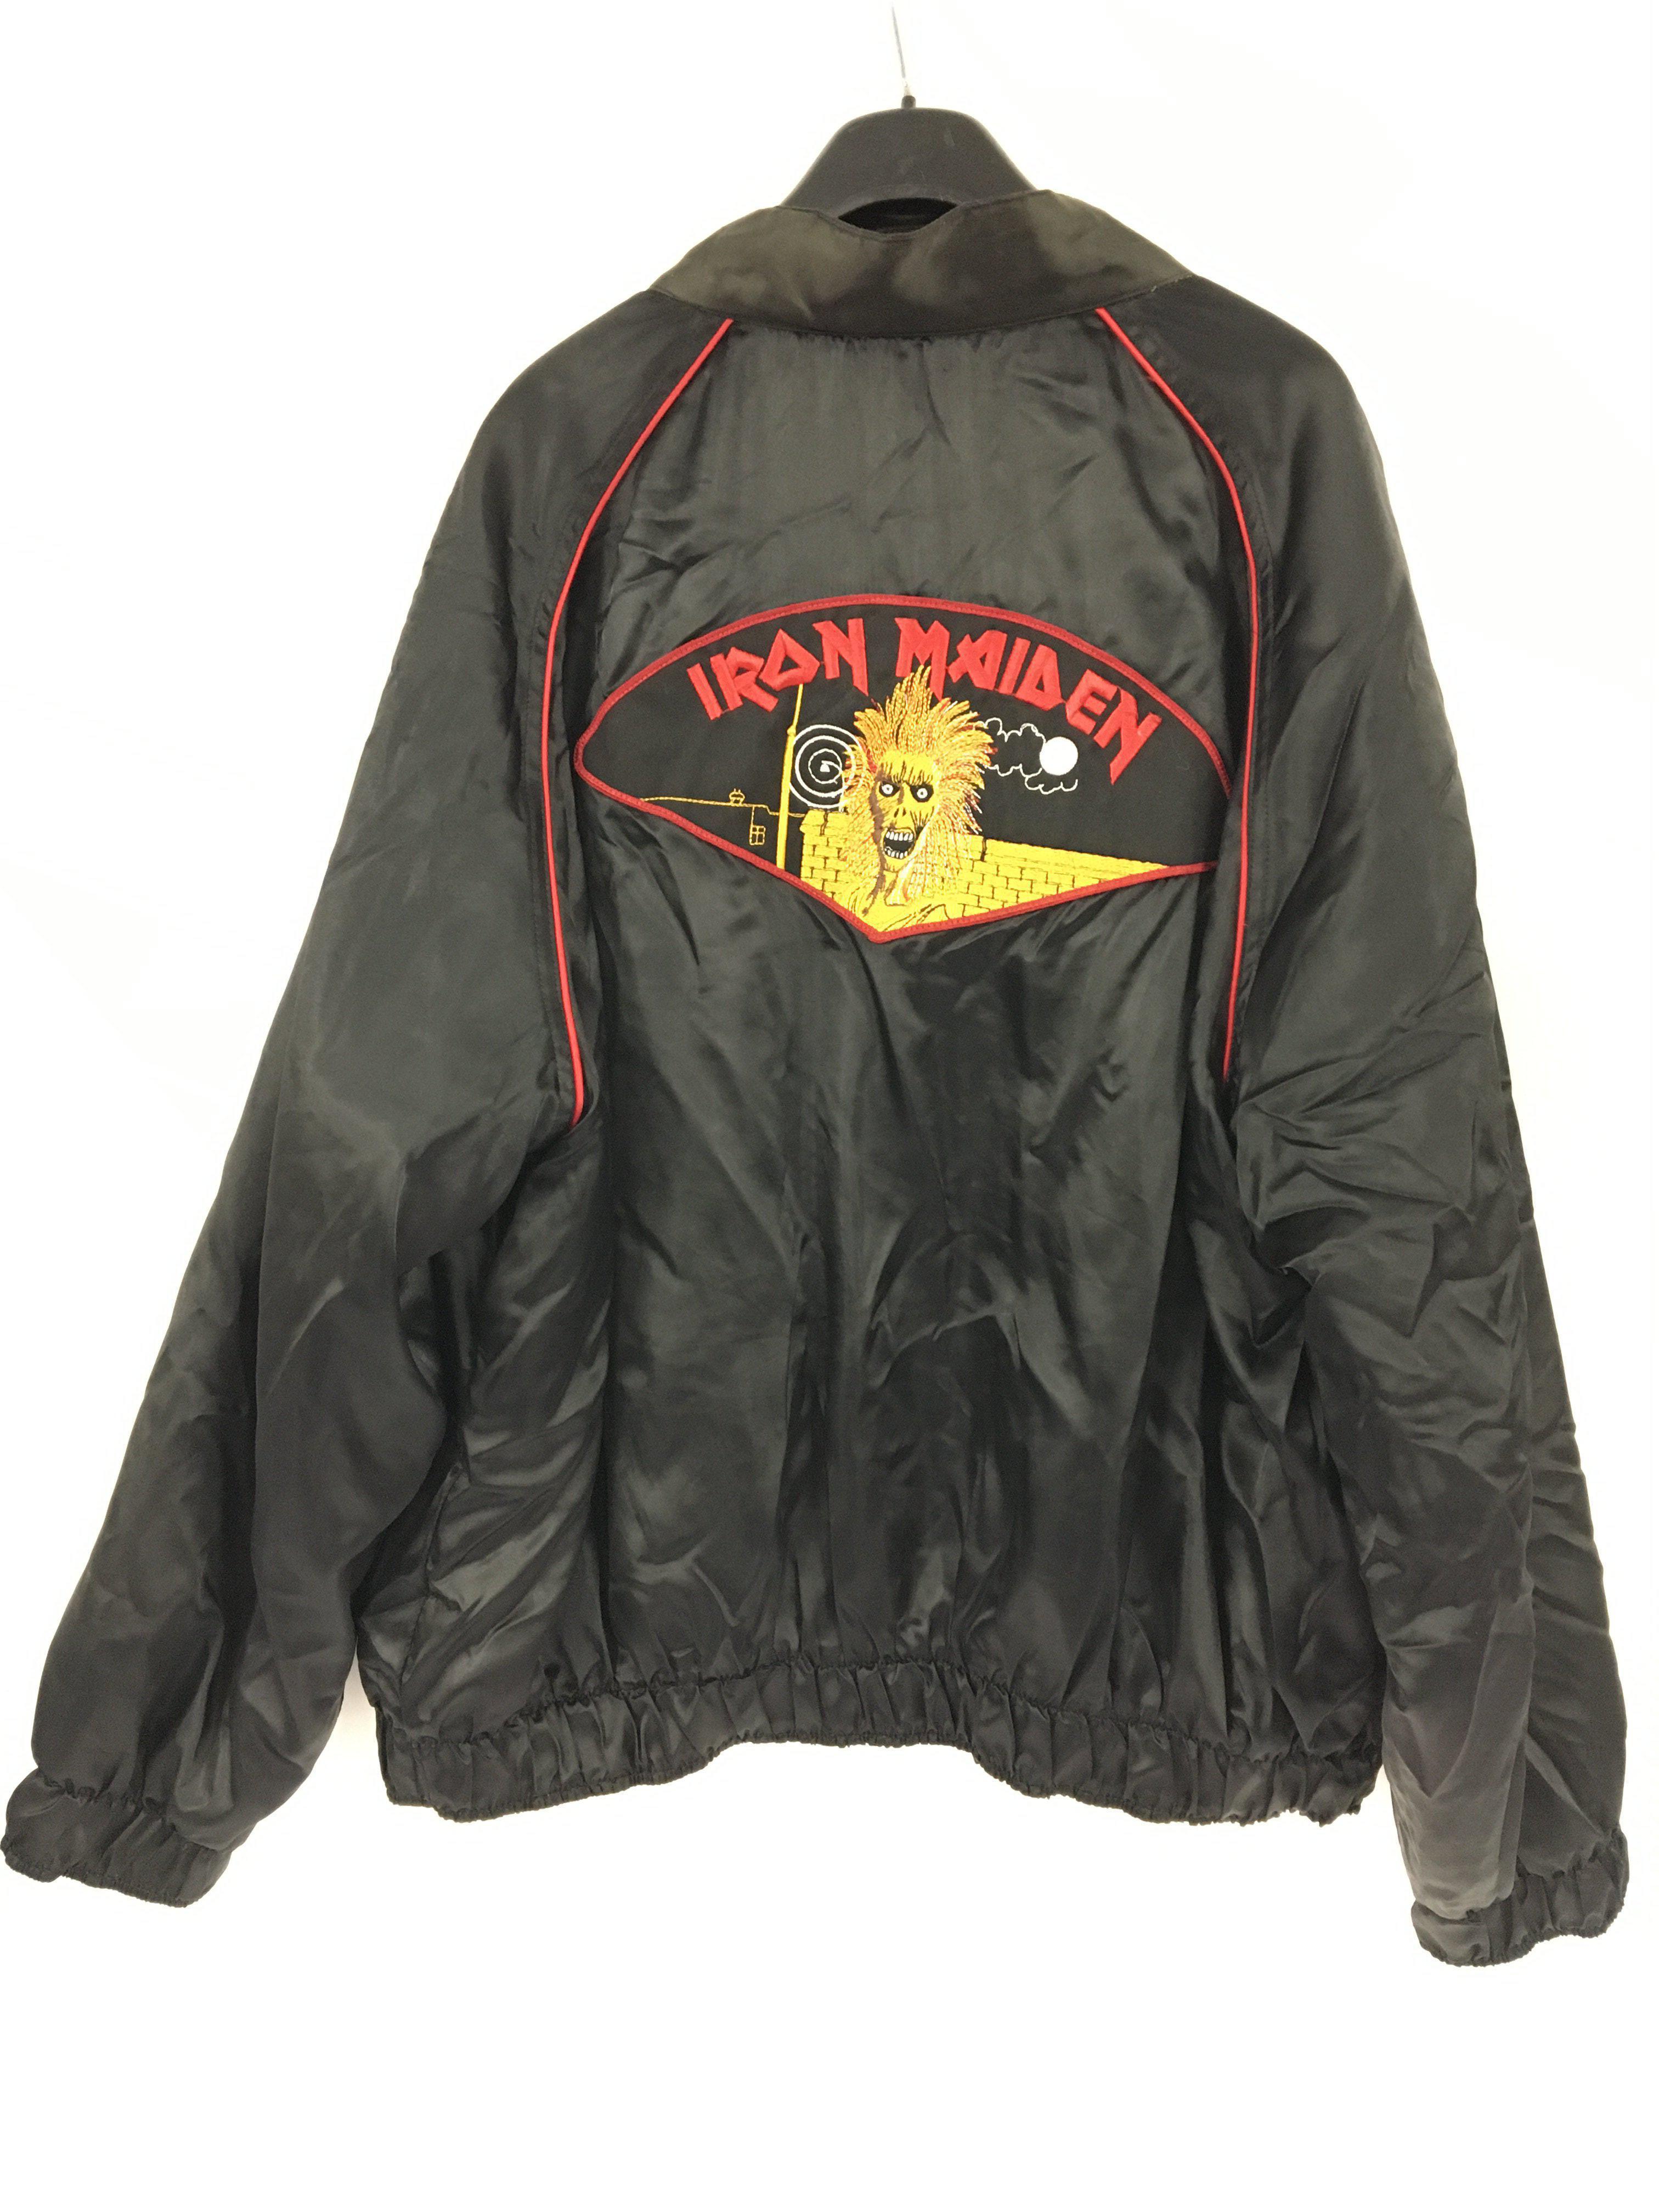 An unofficial Iron Maiden 1980 tour bomber jacket, - Image 2 of 2